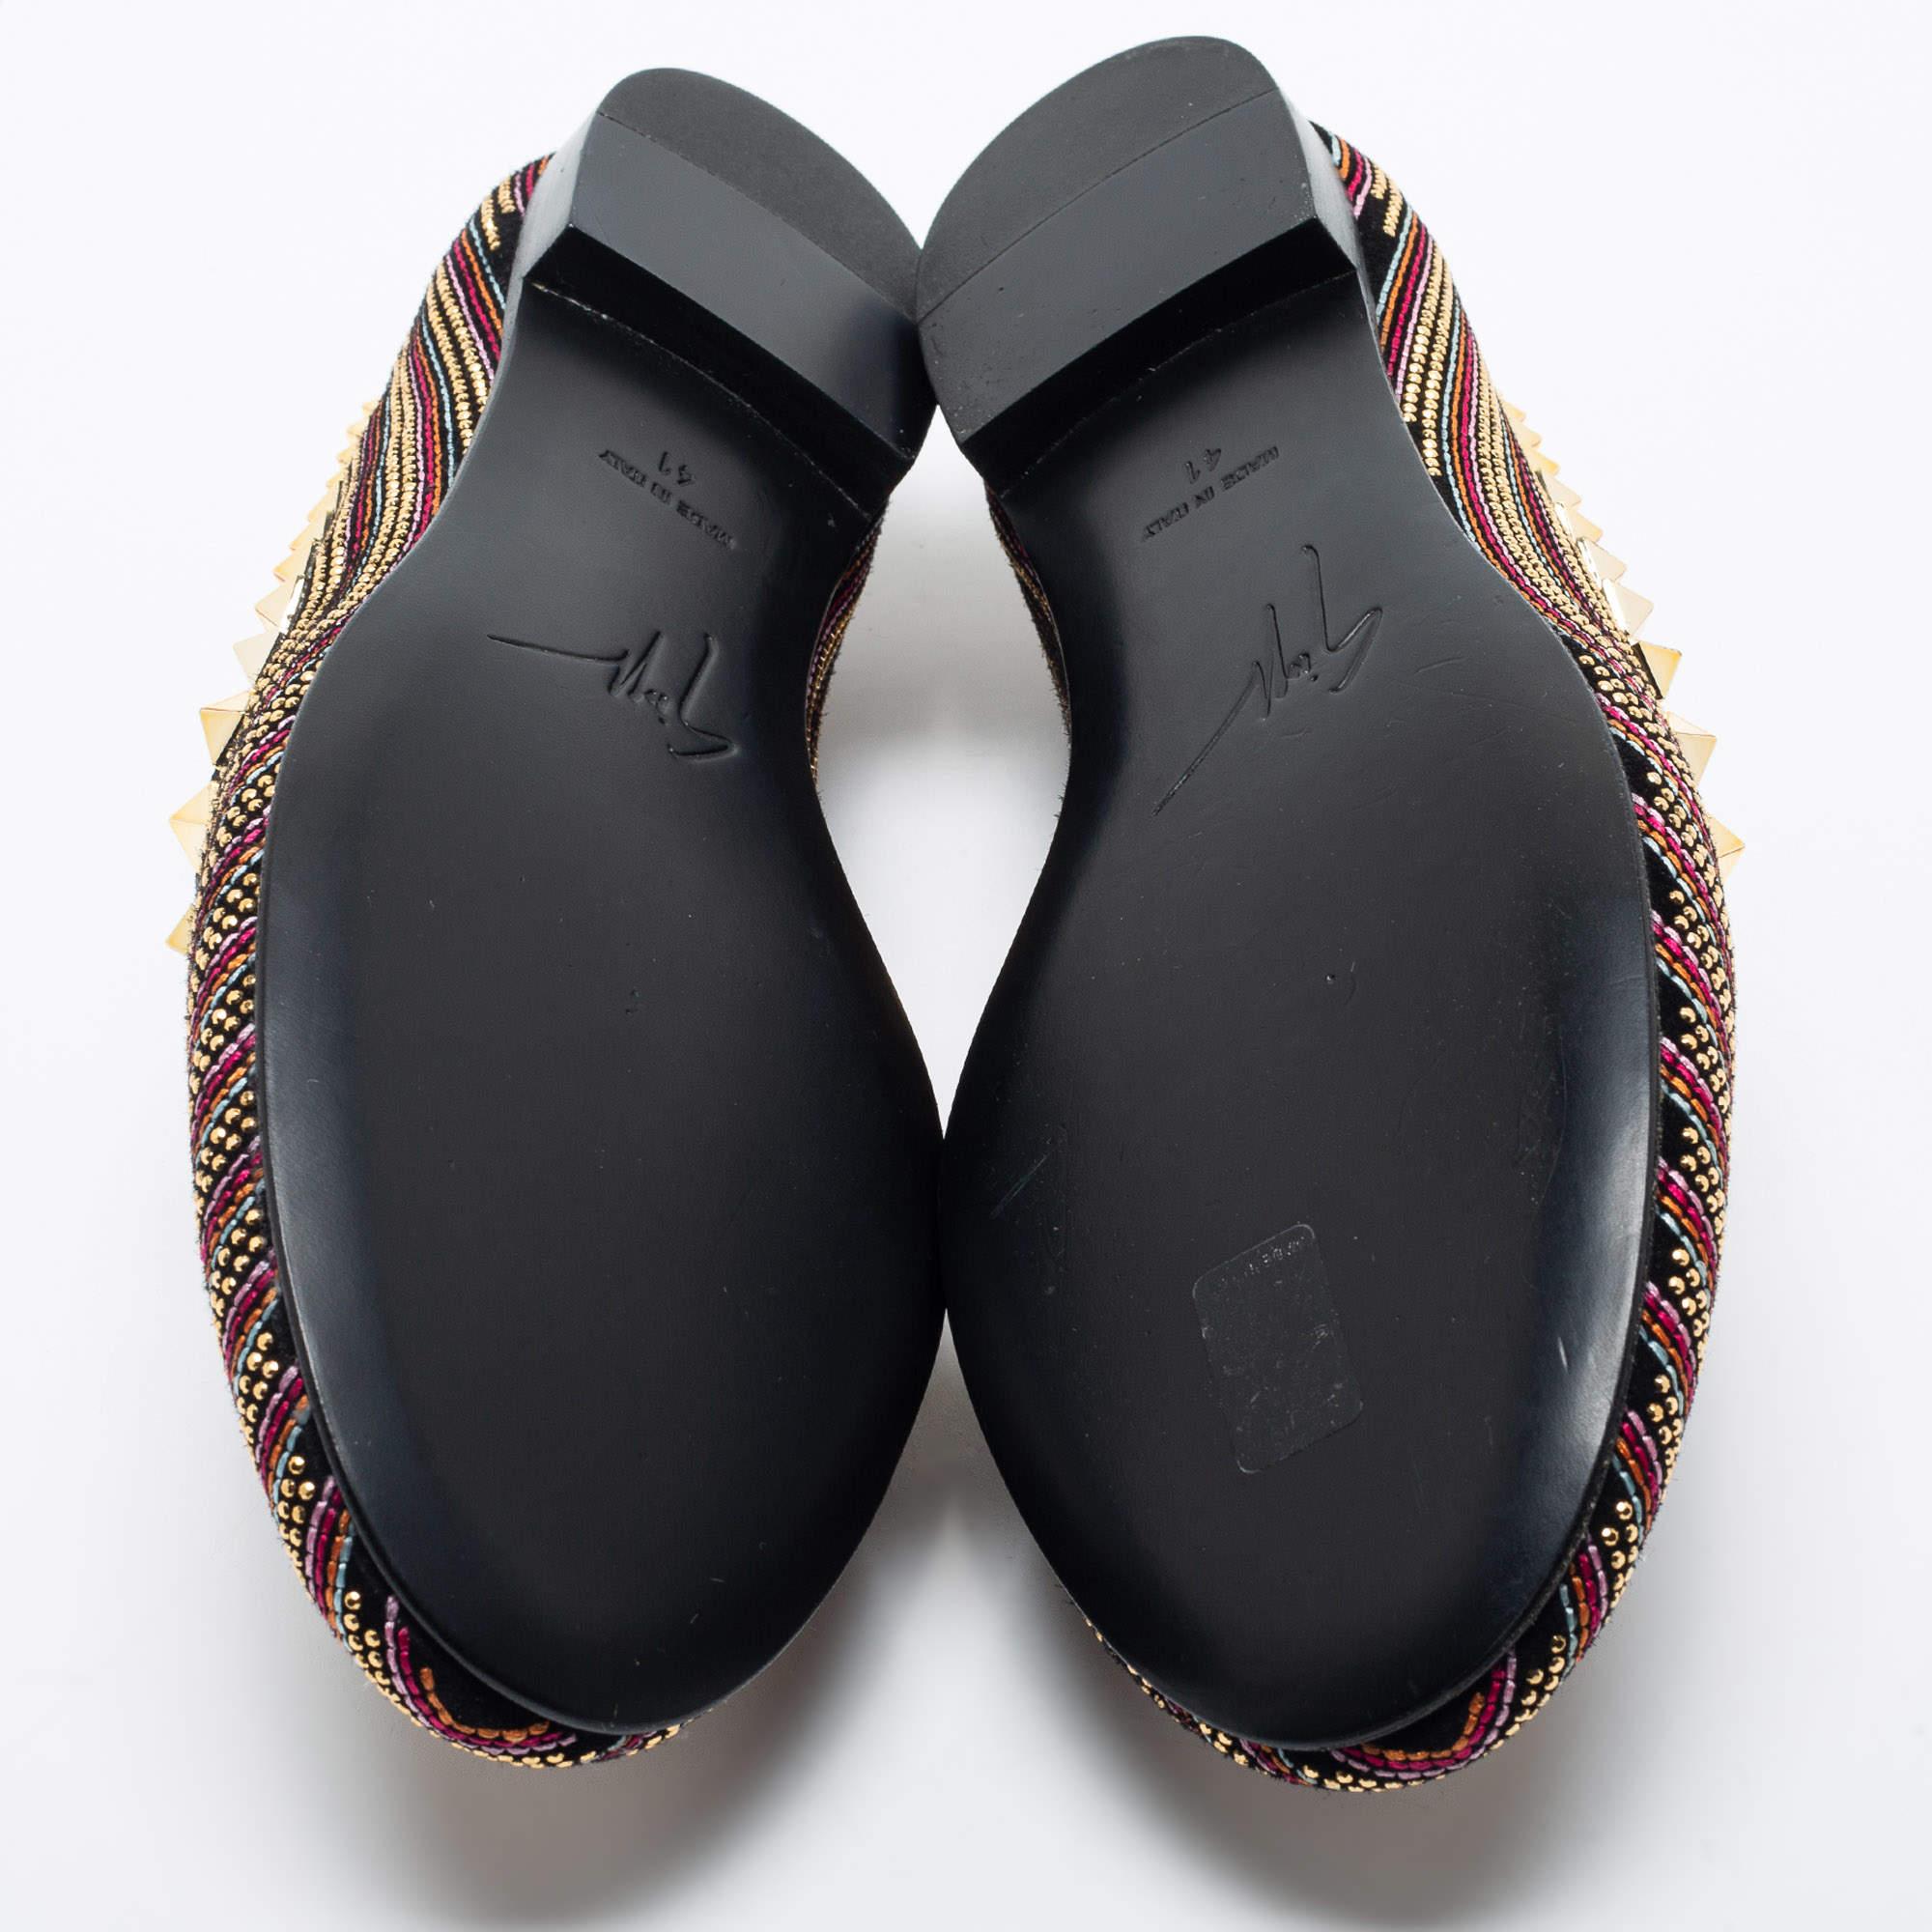 Giuseppe Zanotti Multicolor Embellished Suede Smoking Slippers Size 41 For Sale 4